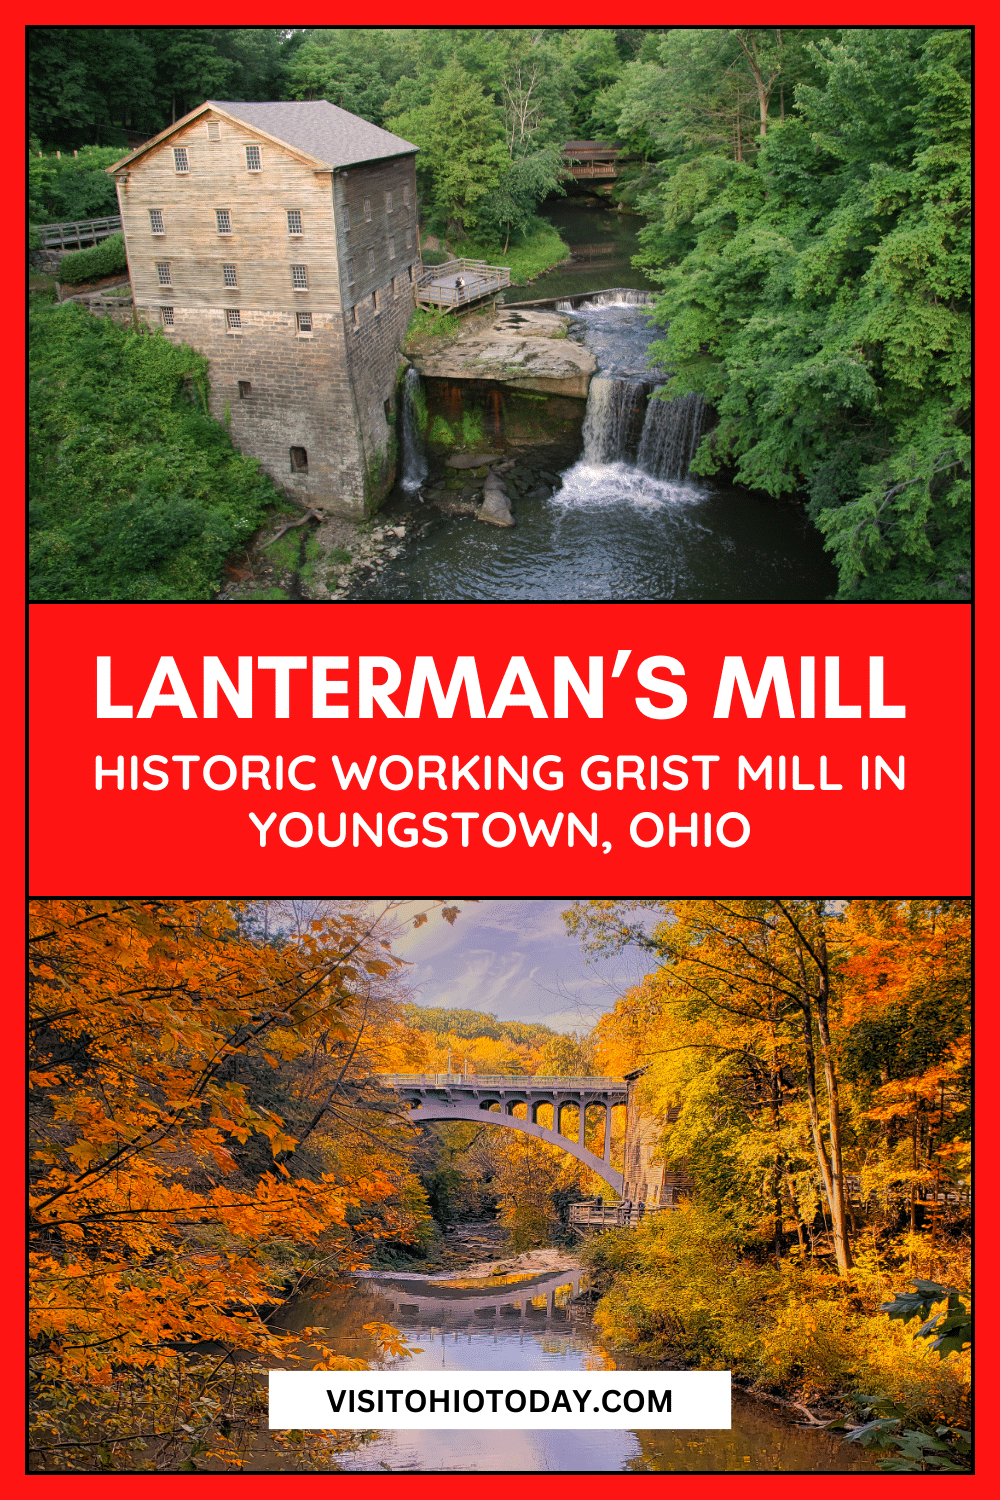 Lanterman's Mill in Youngstown Ohio is steeped in history, is a stunning place to visit, and has inviting walks and an amazing waterfall.